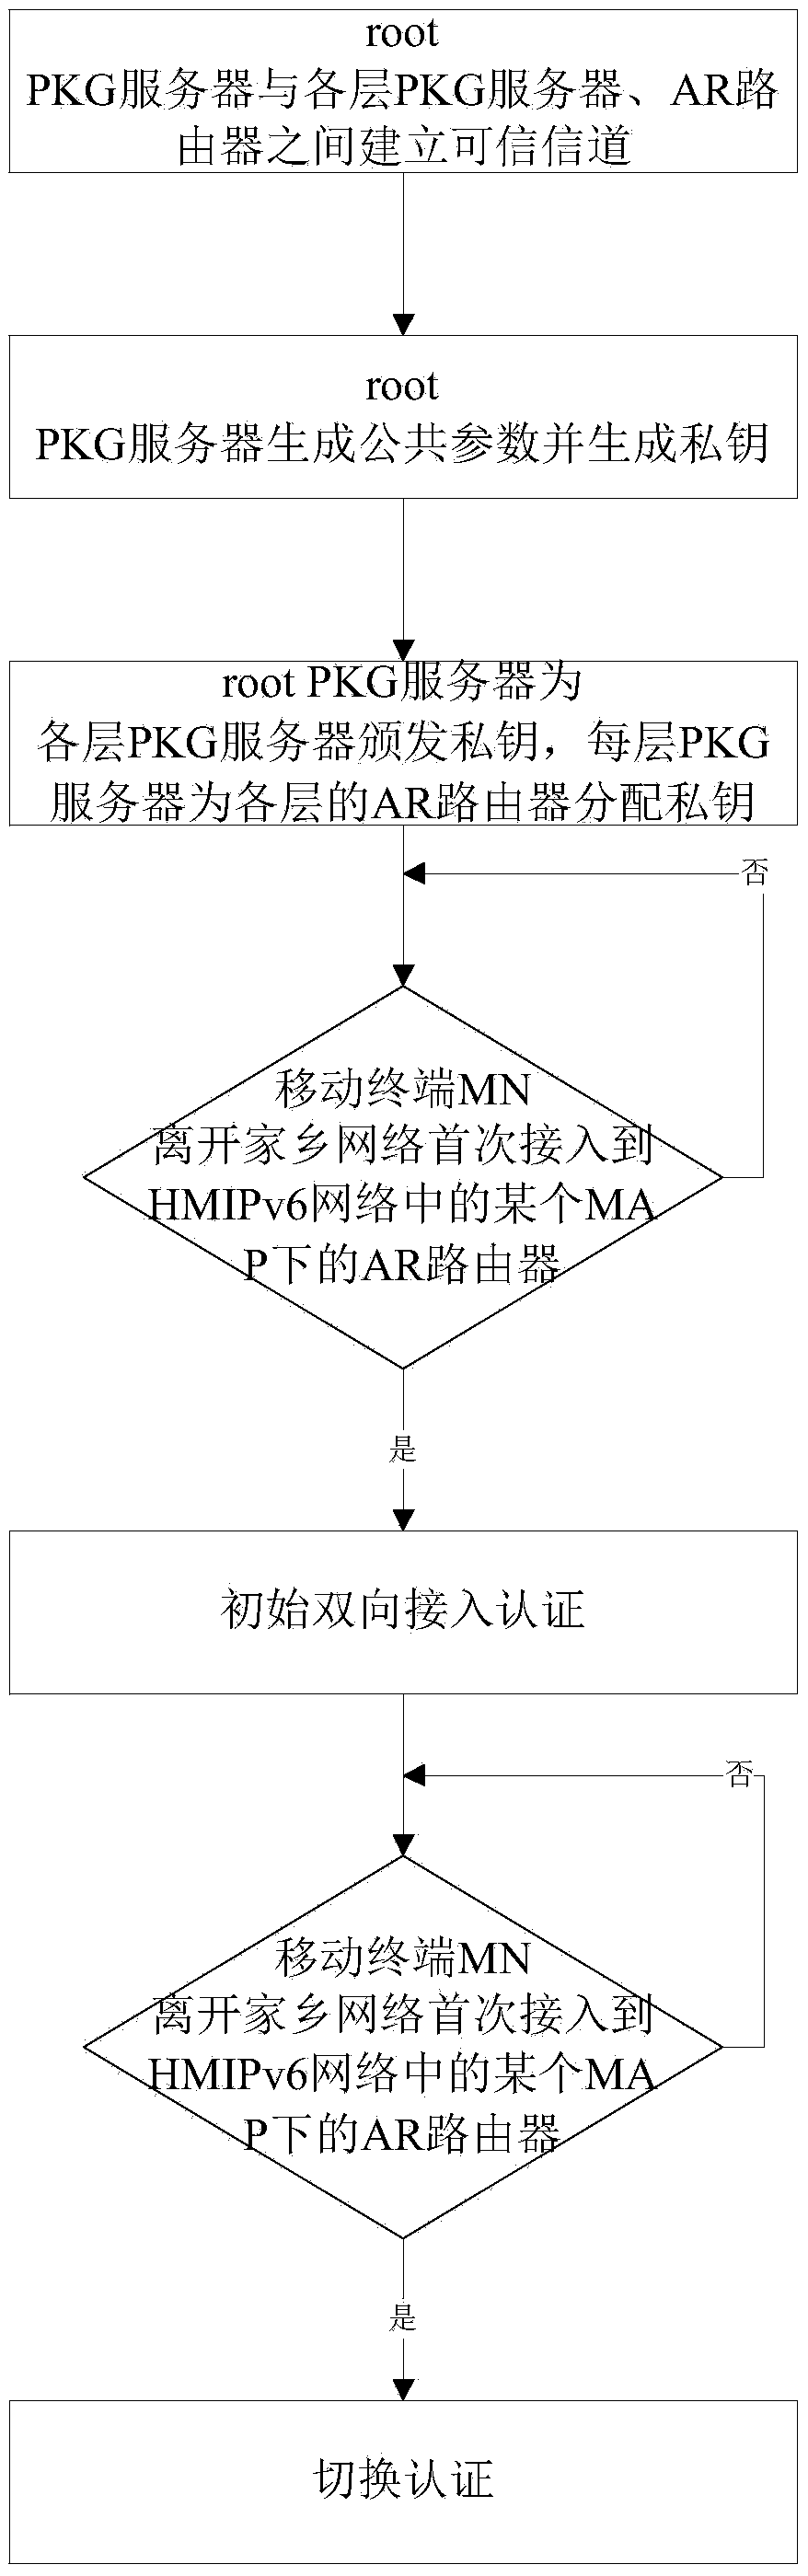 Two-way access authentication method for multi-layer-MAP oriented HMIPv6 network